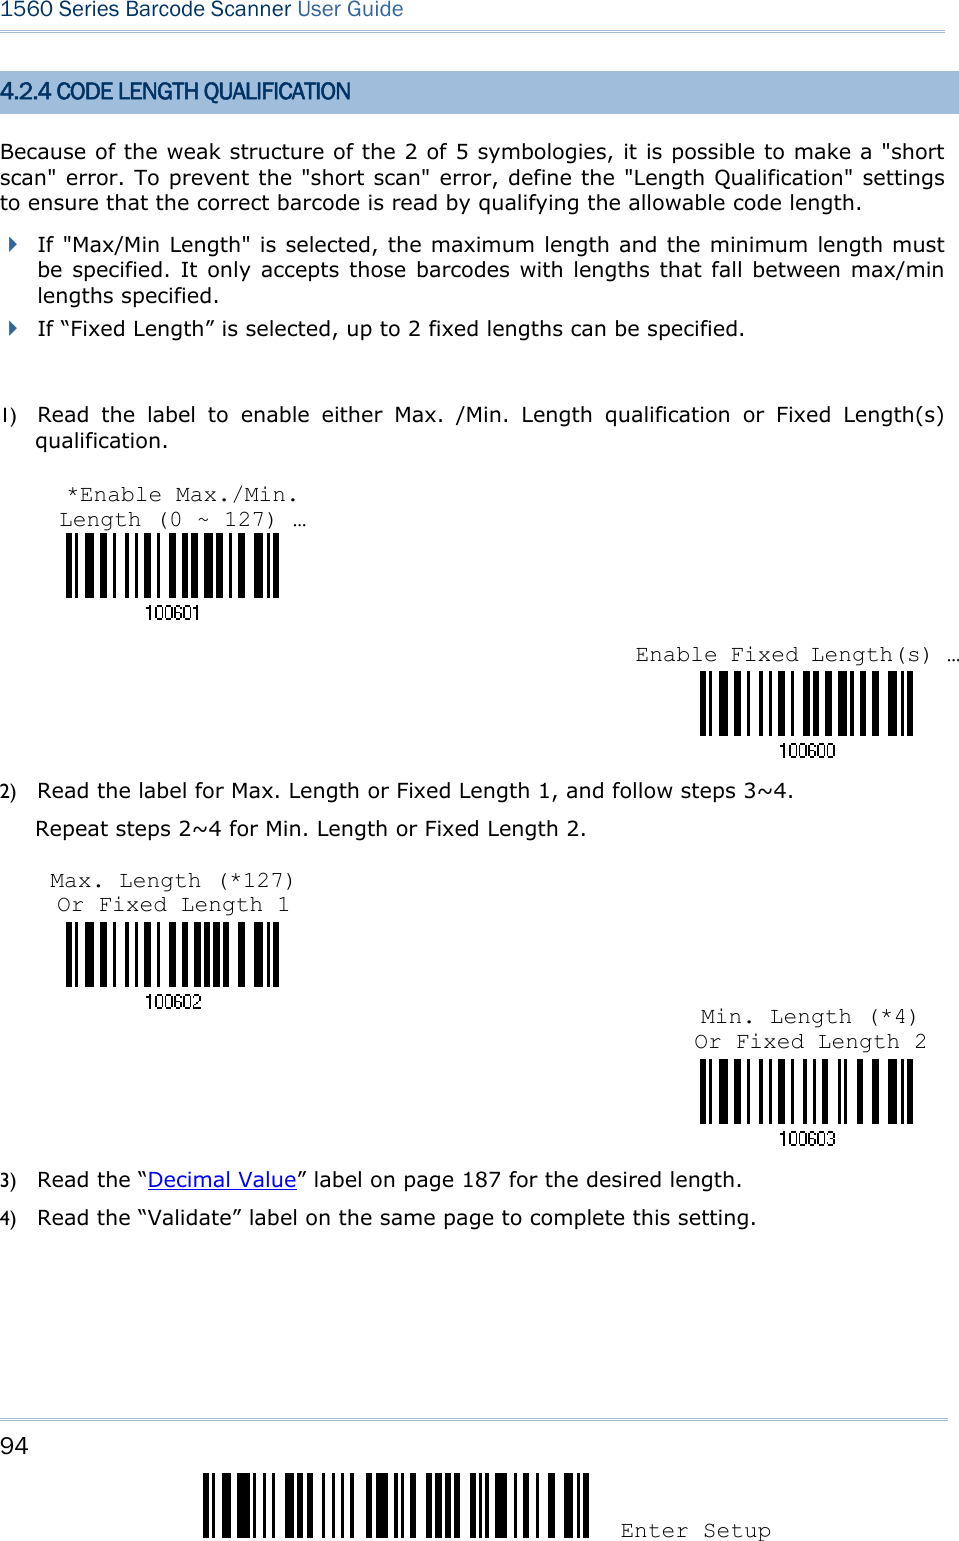 94 Enter Setup 1560 Series Barcode Scanner User Guide  4.2.4 CODE LENGTH QUALIFICATION Because of the weak structure of the 2 of 5 symbologies, it is possible to make a &quot;short scan&quot; error. To prevent the &quot;short scan&quot; error, define the &quot;Length Qualification&quot; settings to ensure that the correct barcode is read by qualifying the allowable code length.  If &quot;Max/Min Length&quot; is selected, the maximum length and the minimum length must be specified. It only accepts those barcodes with lengths that fall between max/min lengths specified.  If “Fixed Length” is selected, up to 2 fixed lengths can be specified.  1) Read the label to enable either Max. /Min. Length qualification or Fixed Length(s) qualification.    2) Read the label for Max. Length or Fixed Length 1, and follow steps 3~4. Repeat steps 2~4 for Min. Length or Fixed Length 2.    3) Read the “Decimal Value” label on page 187 for the desired length.   4) Read the “Validate” label on the same page to complete this setting.   *Enable Max./Min. Length (0 ~ 127) … Enable Fixed Length(s) …Max. Length (*127) Or Fixed Length 1 Min. Length (*4) Or Fixed Length 2 